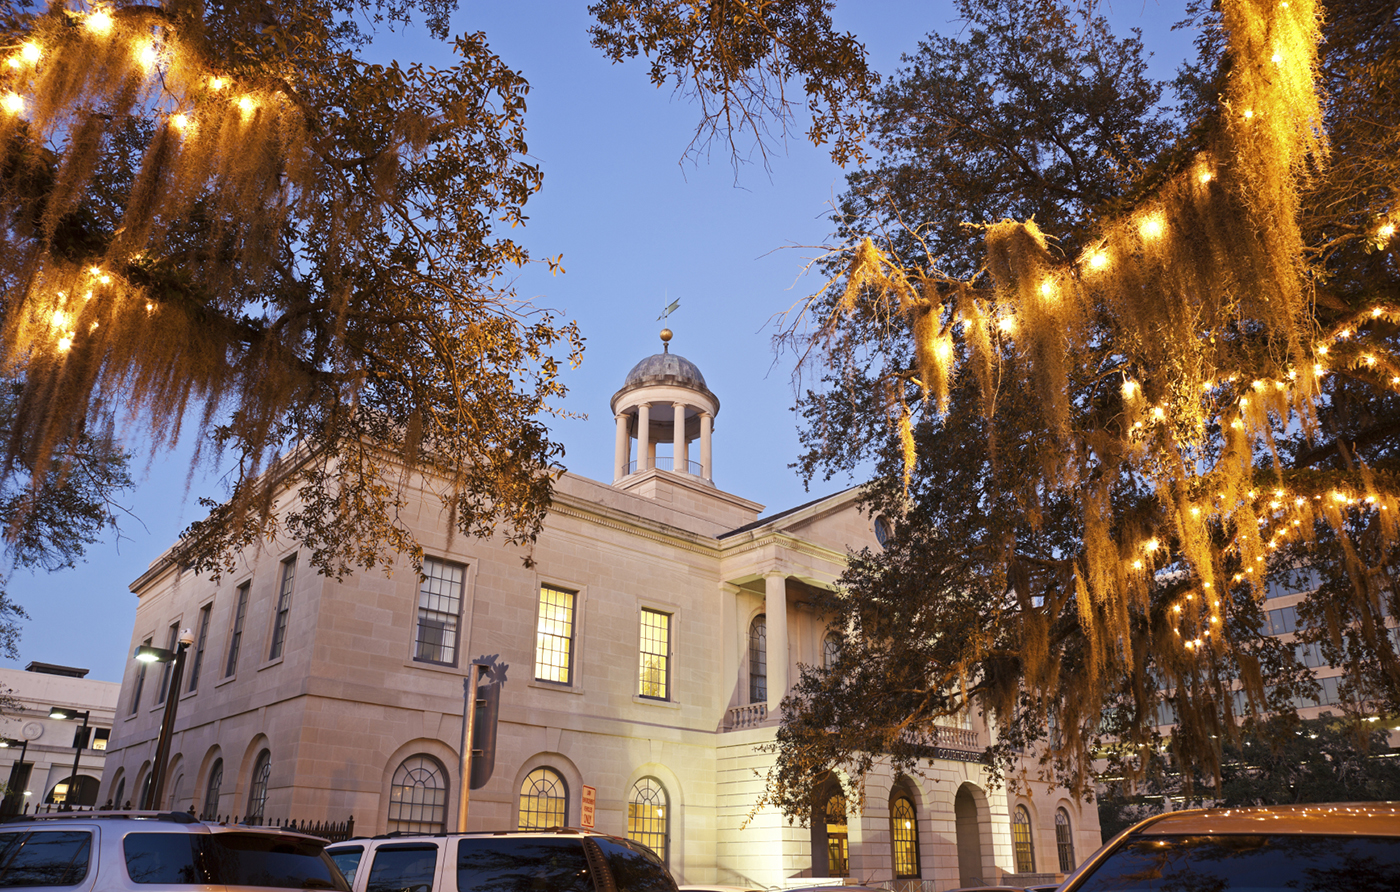 Courthouse in downtown Tallahassee, Florida, USA